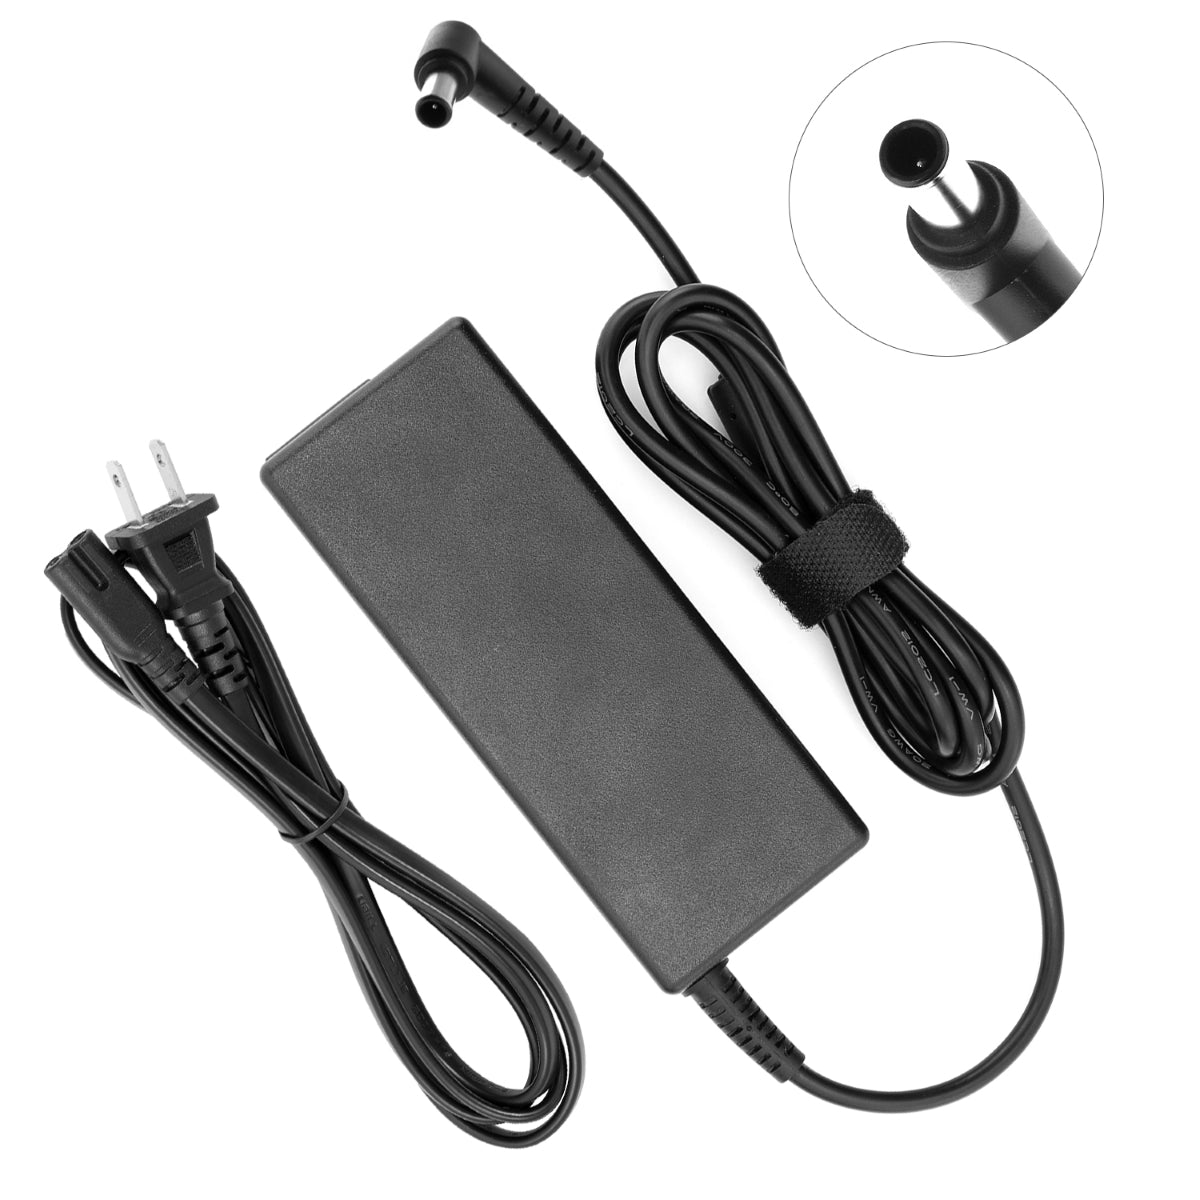 Power Adapter for LG 24LB4510 Monitor TV